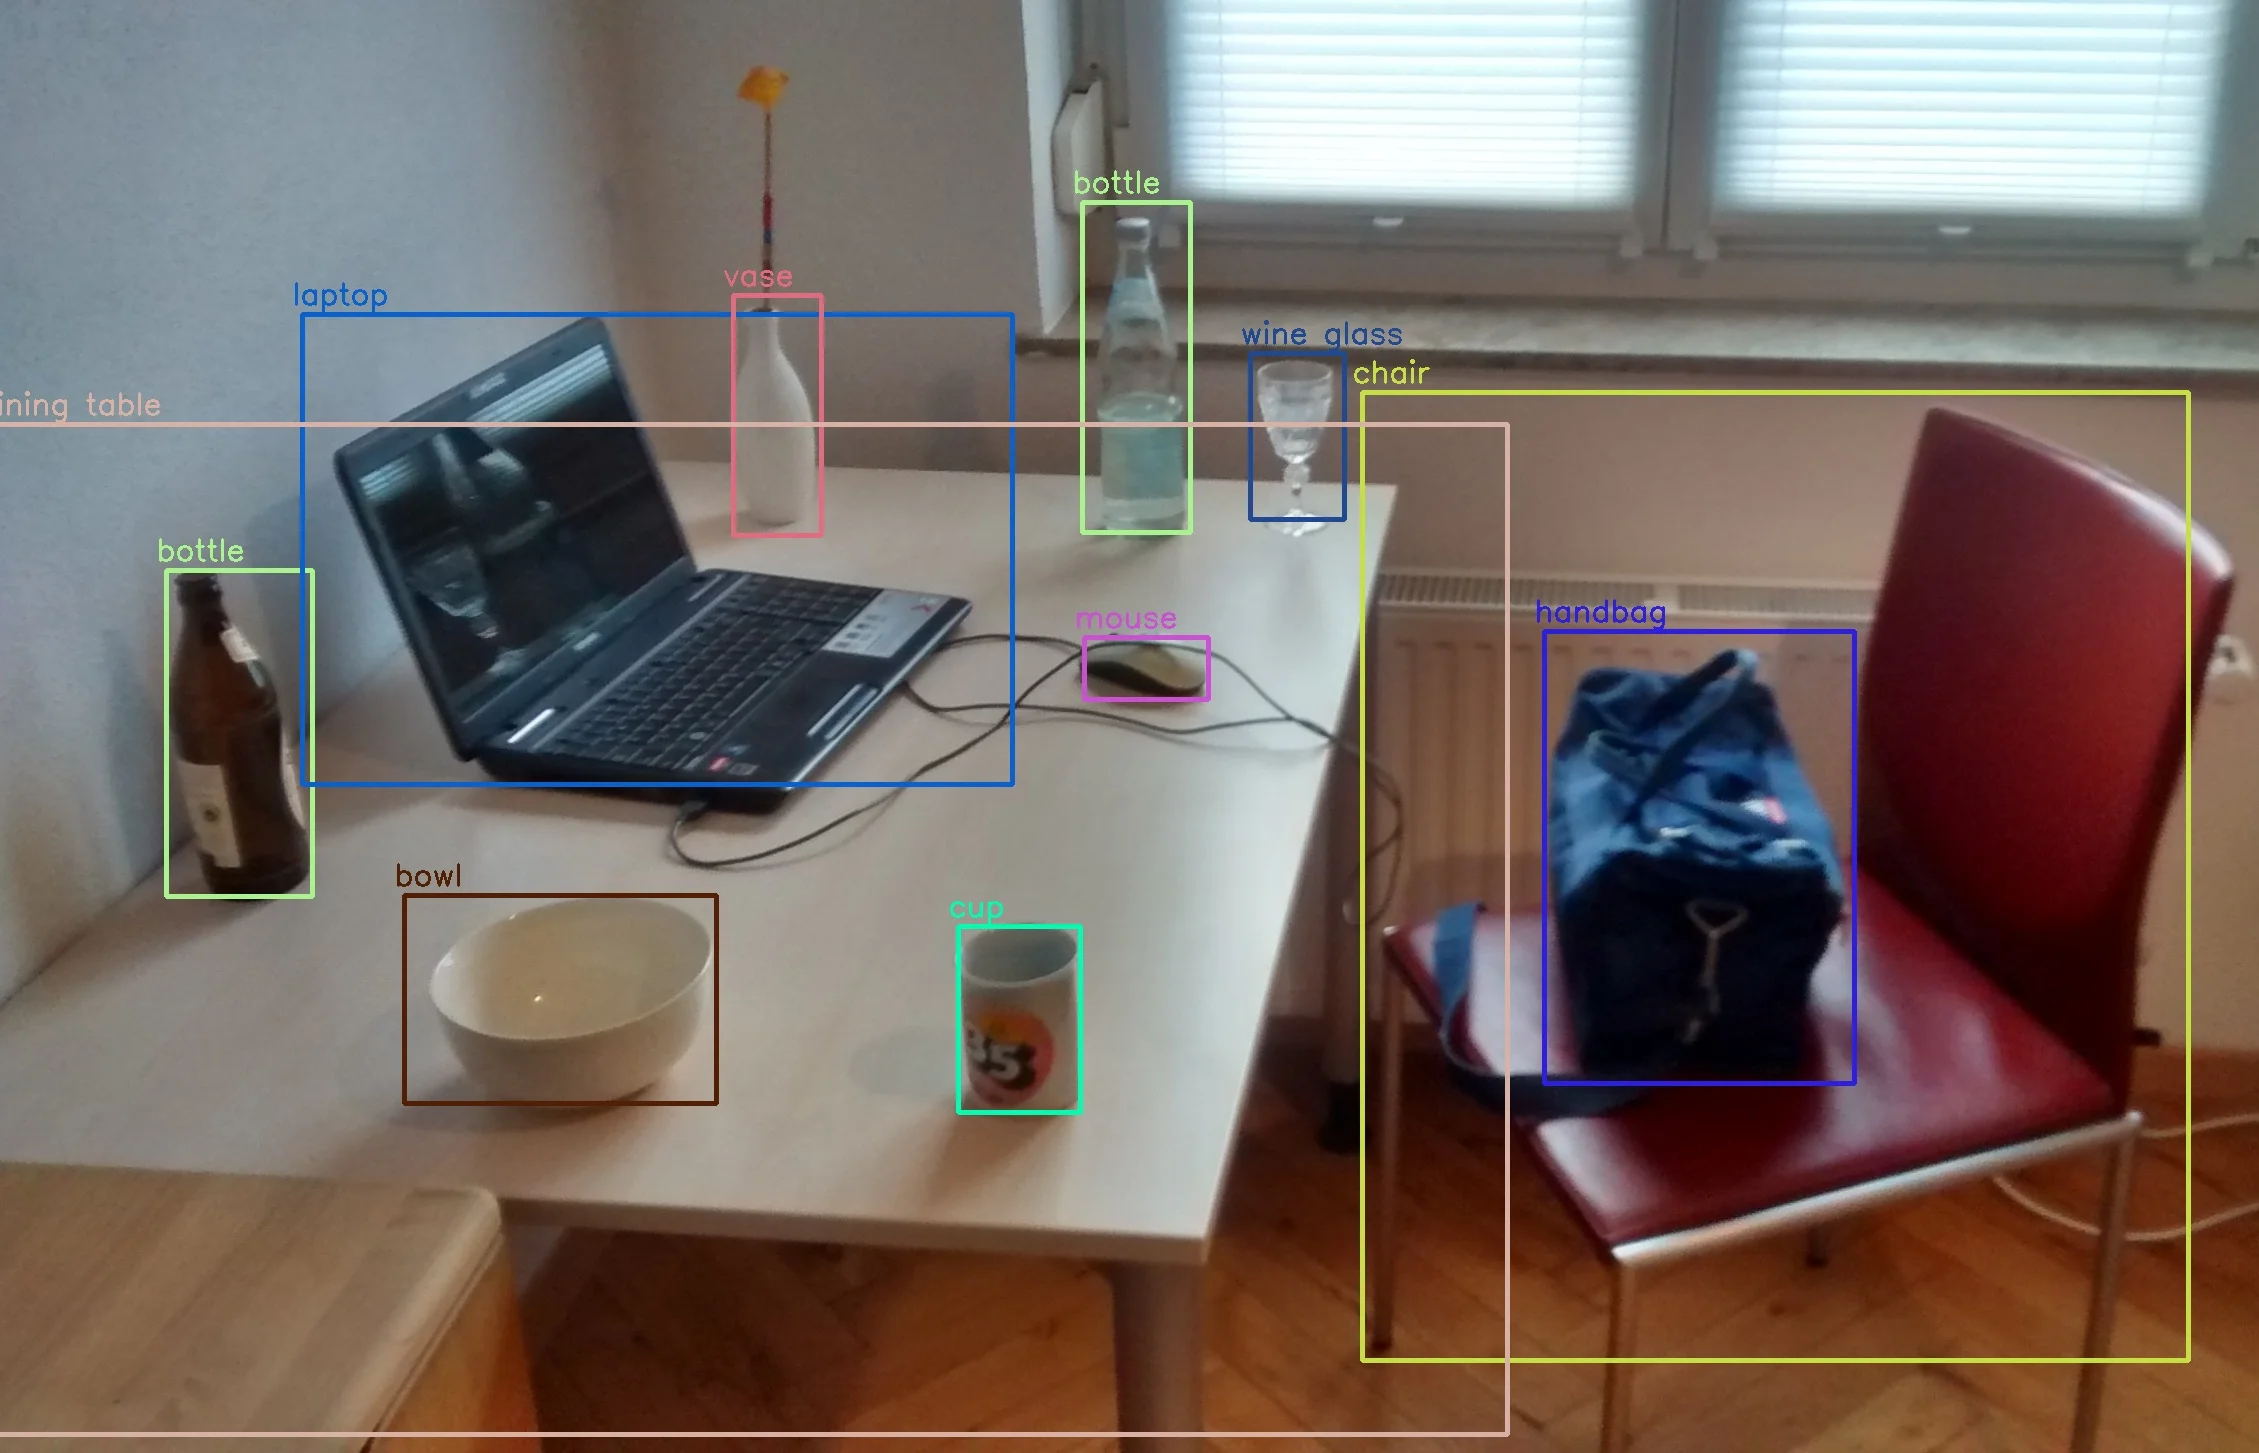 Home object detection